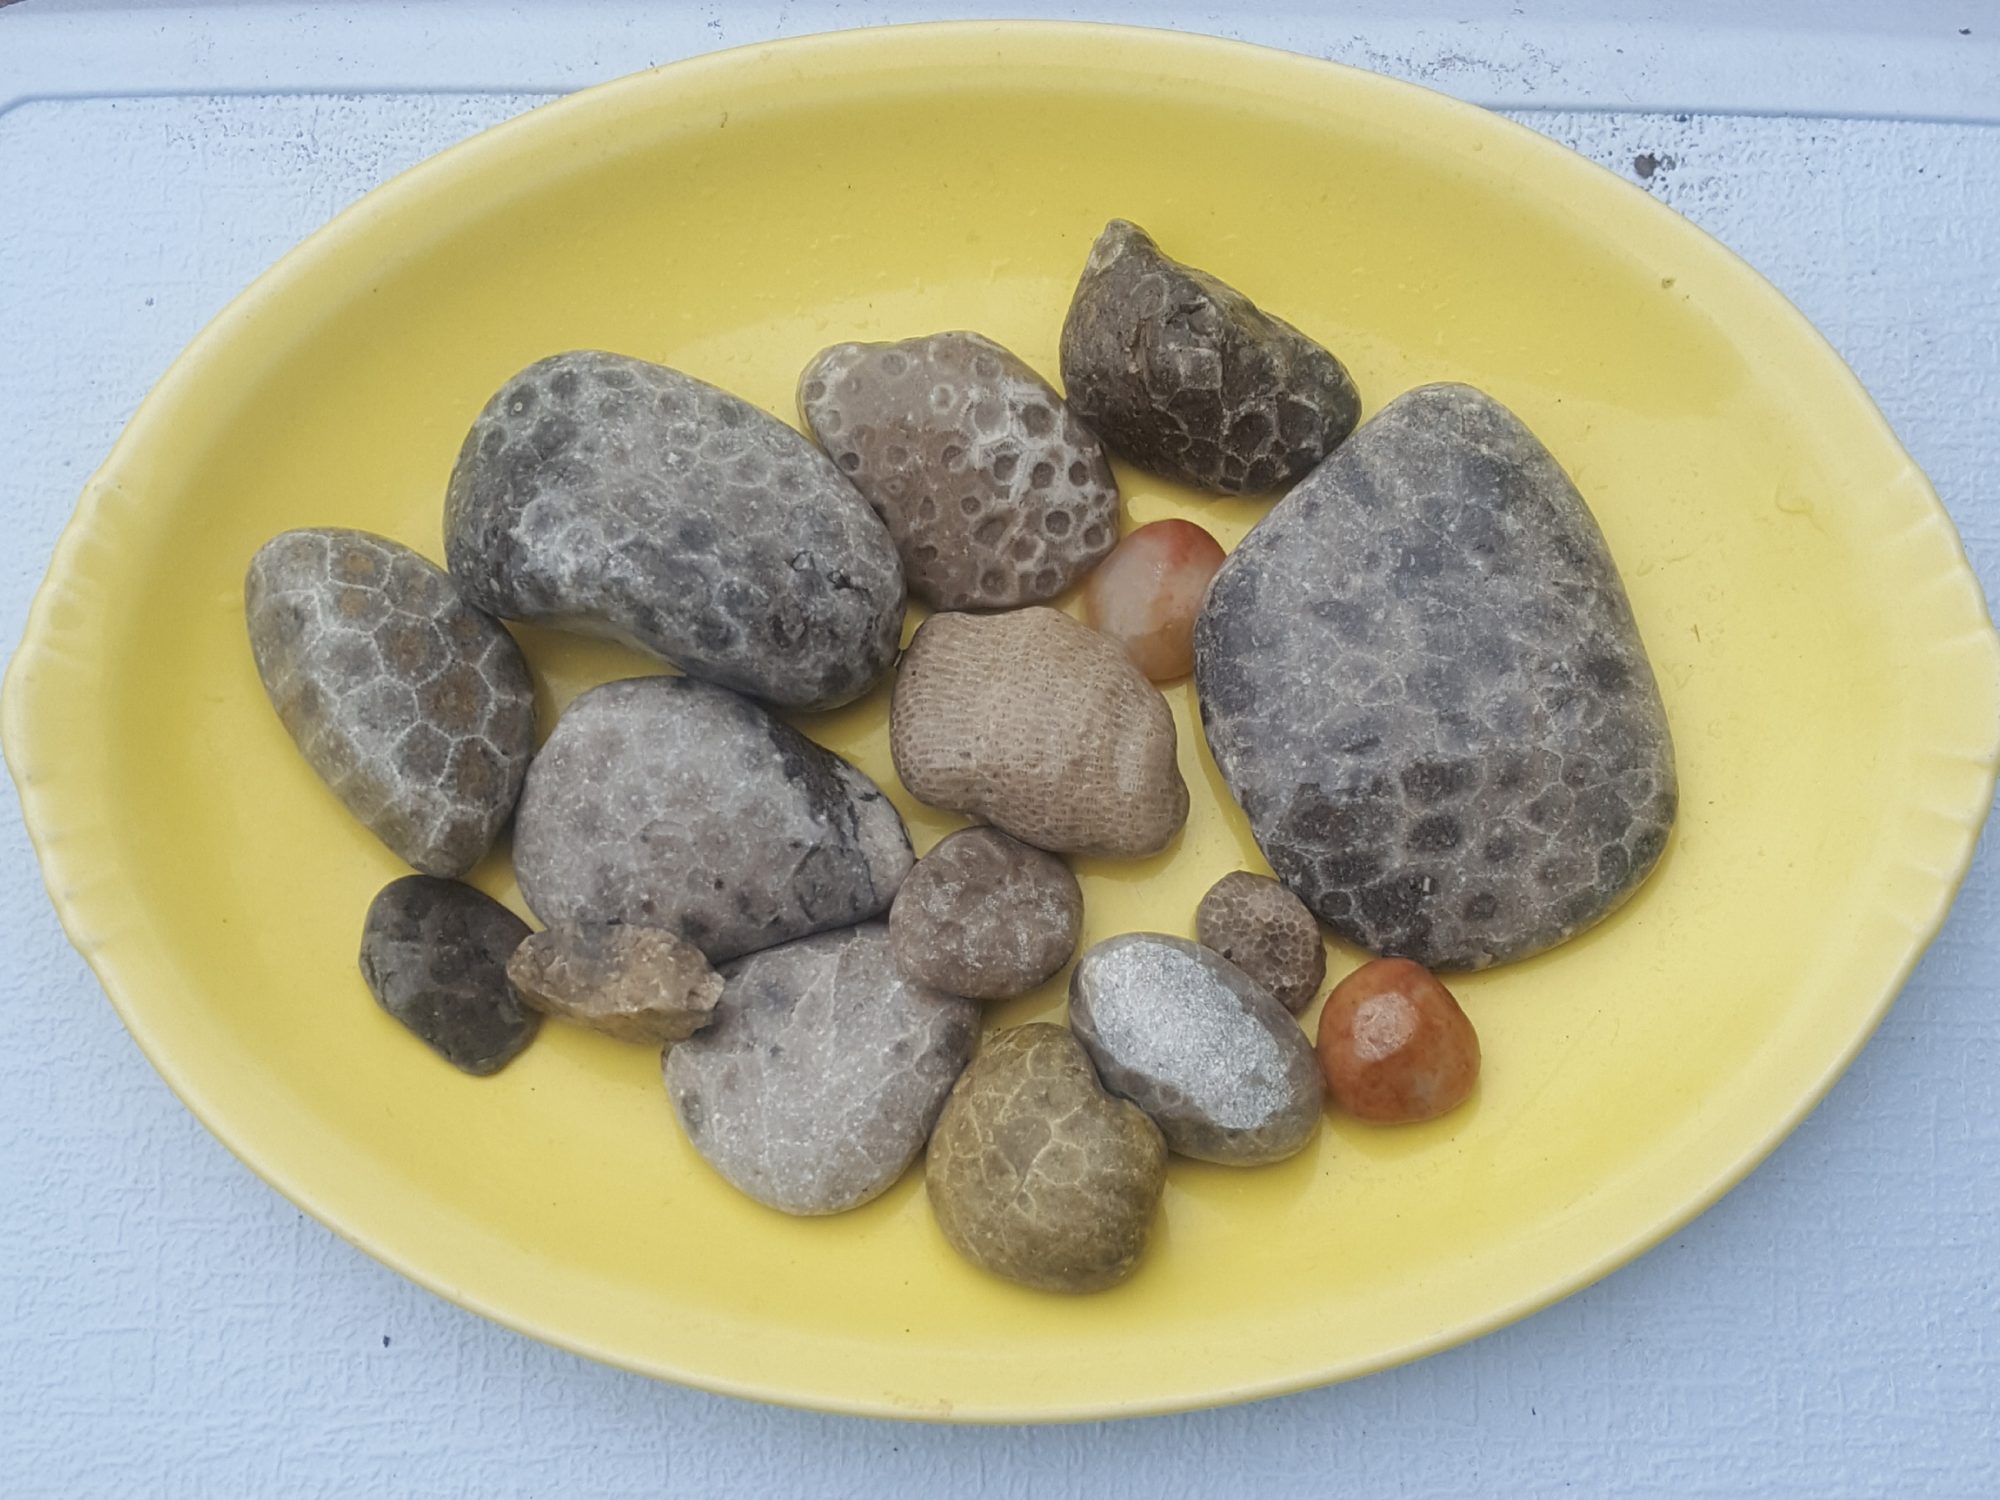 Group of fossilized rocks and petoskey stones found at lake michigan beaches in traverse city and leelanau county.